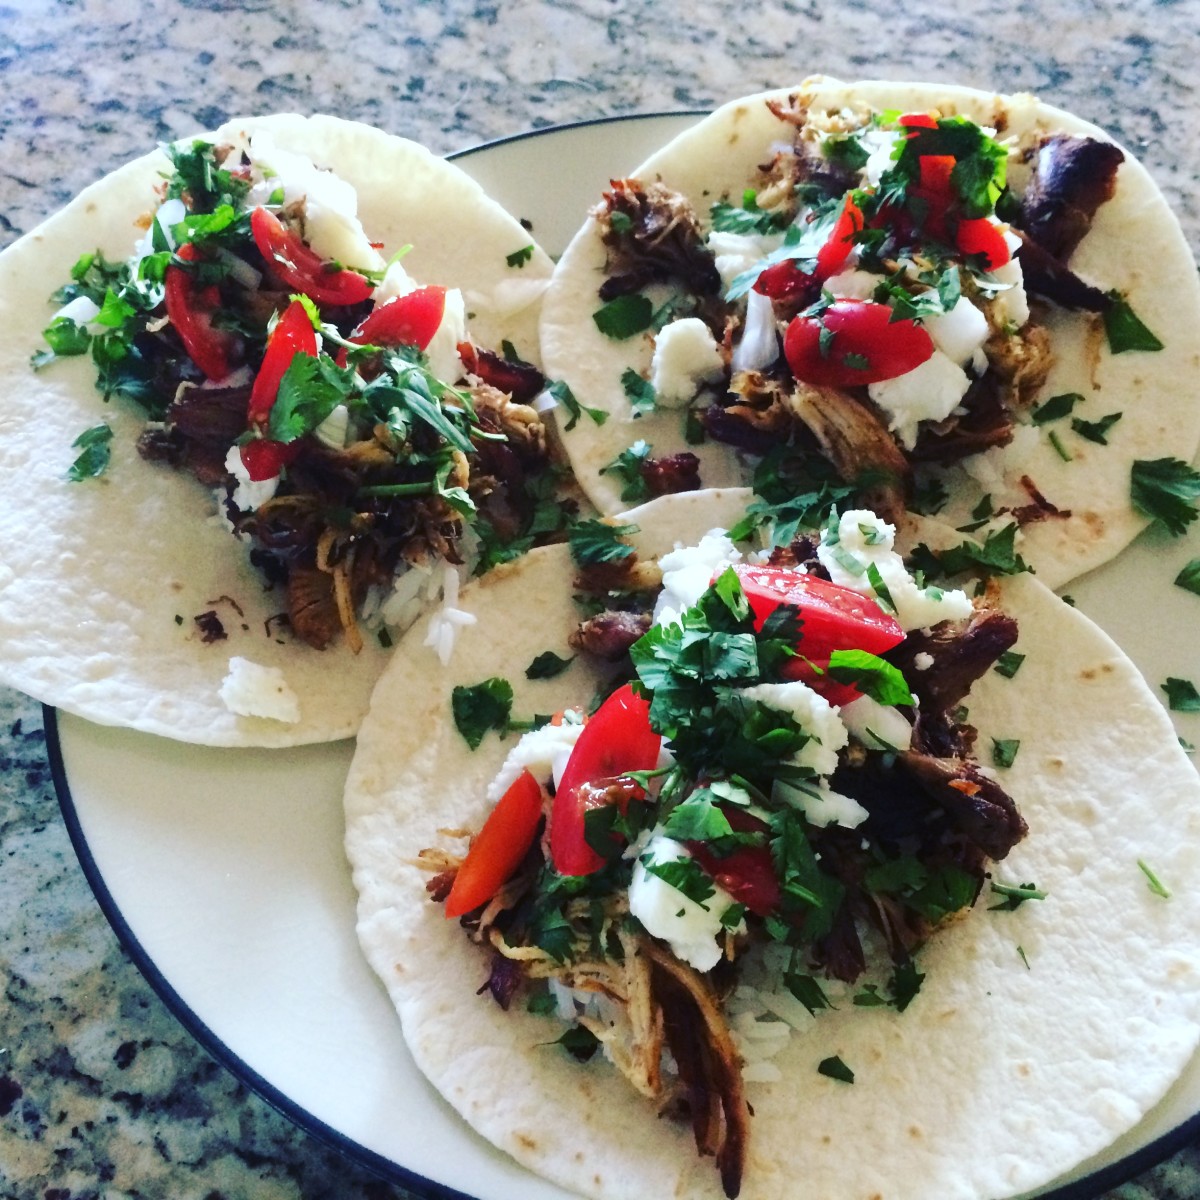 Beer and Citrus-Braised Wild Game Carnitas Street Tacos